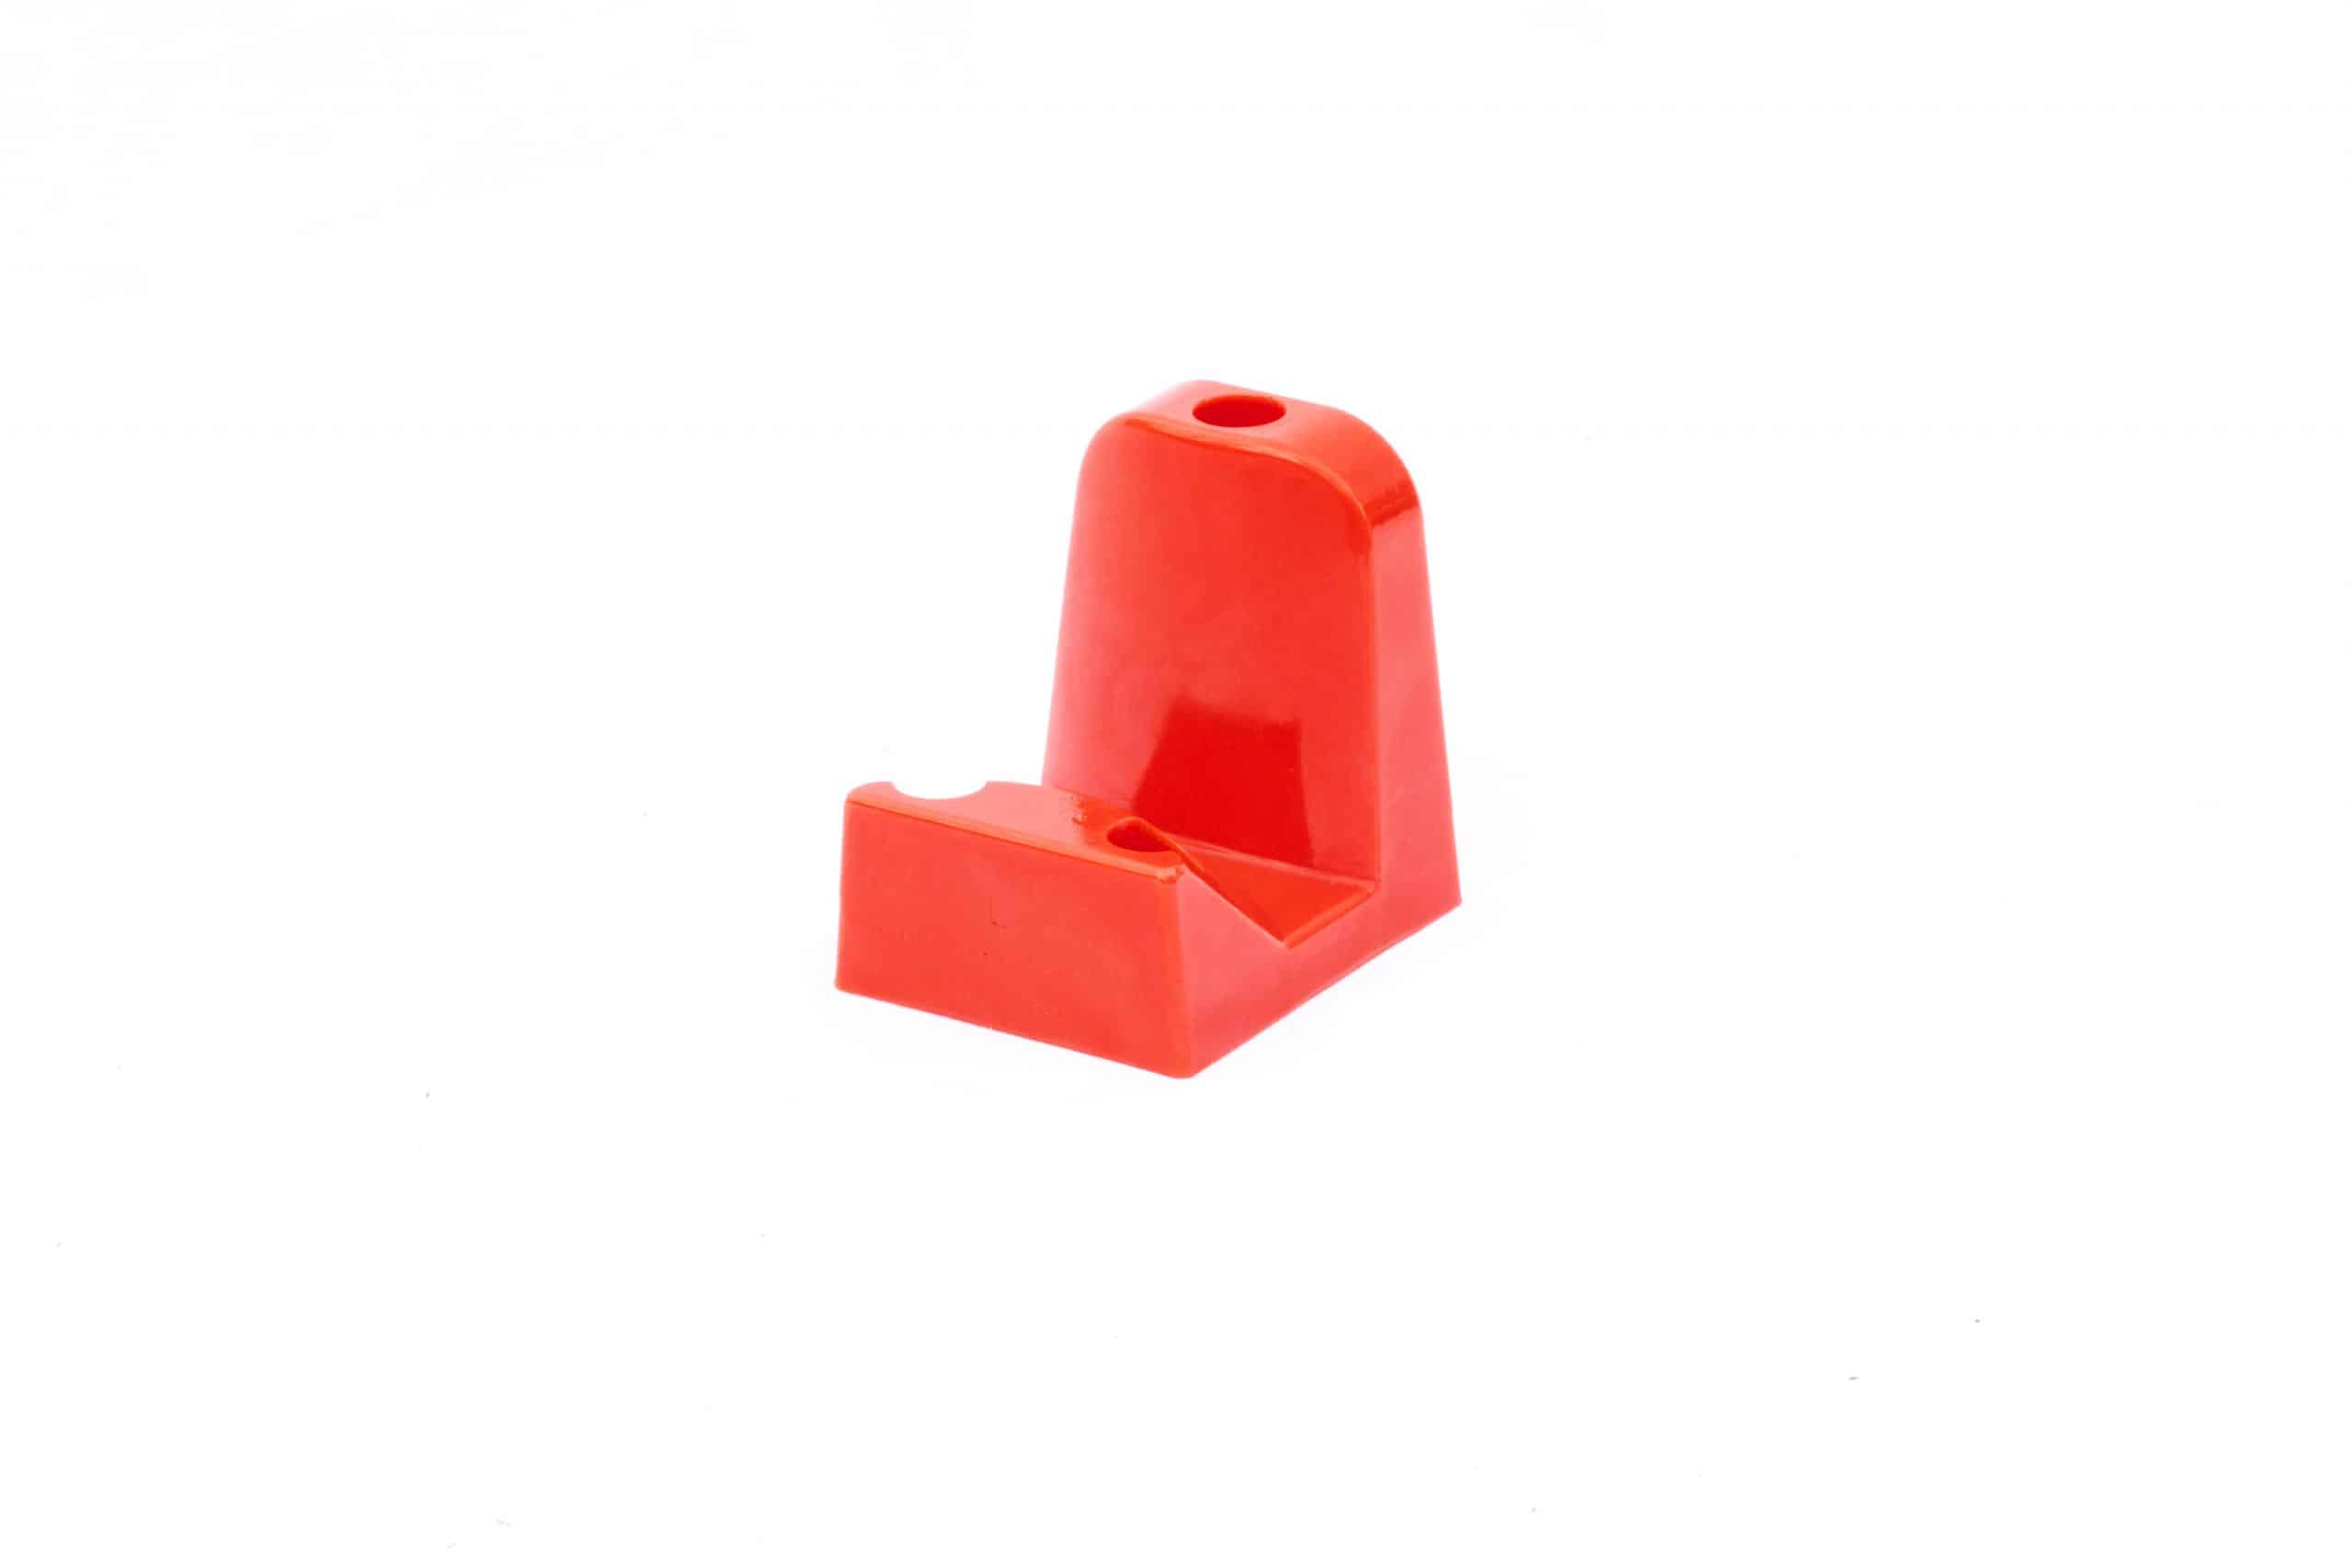 Orange polyurethane body block designed to hold a car door in assembly operations..